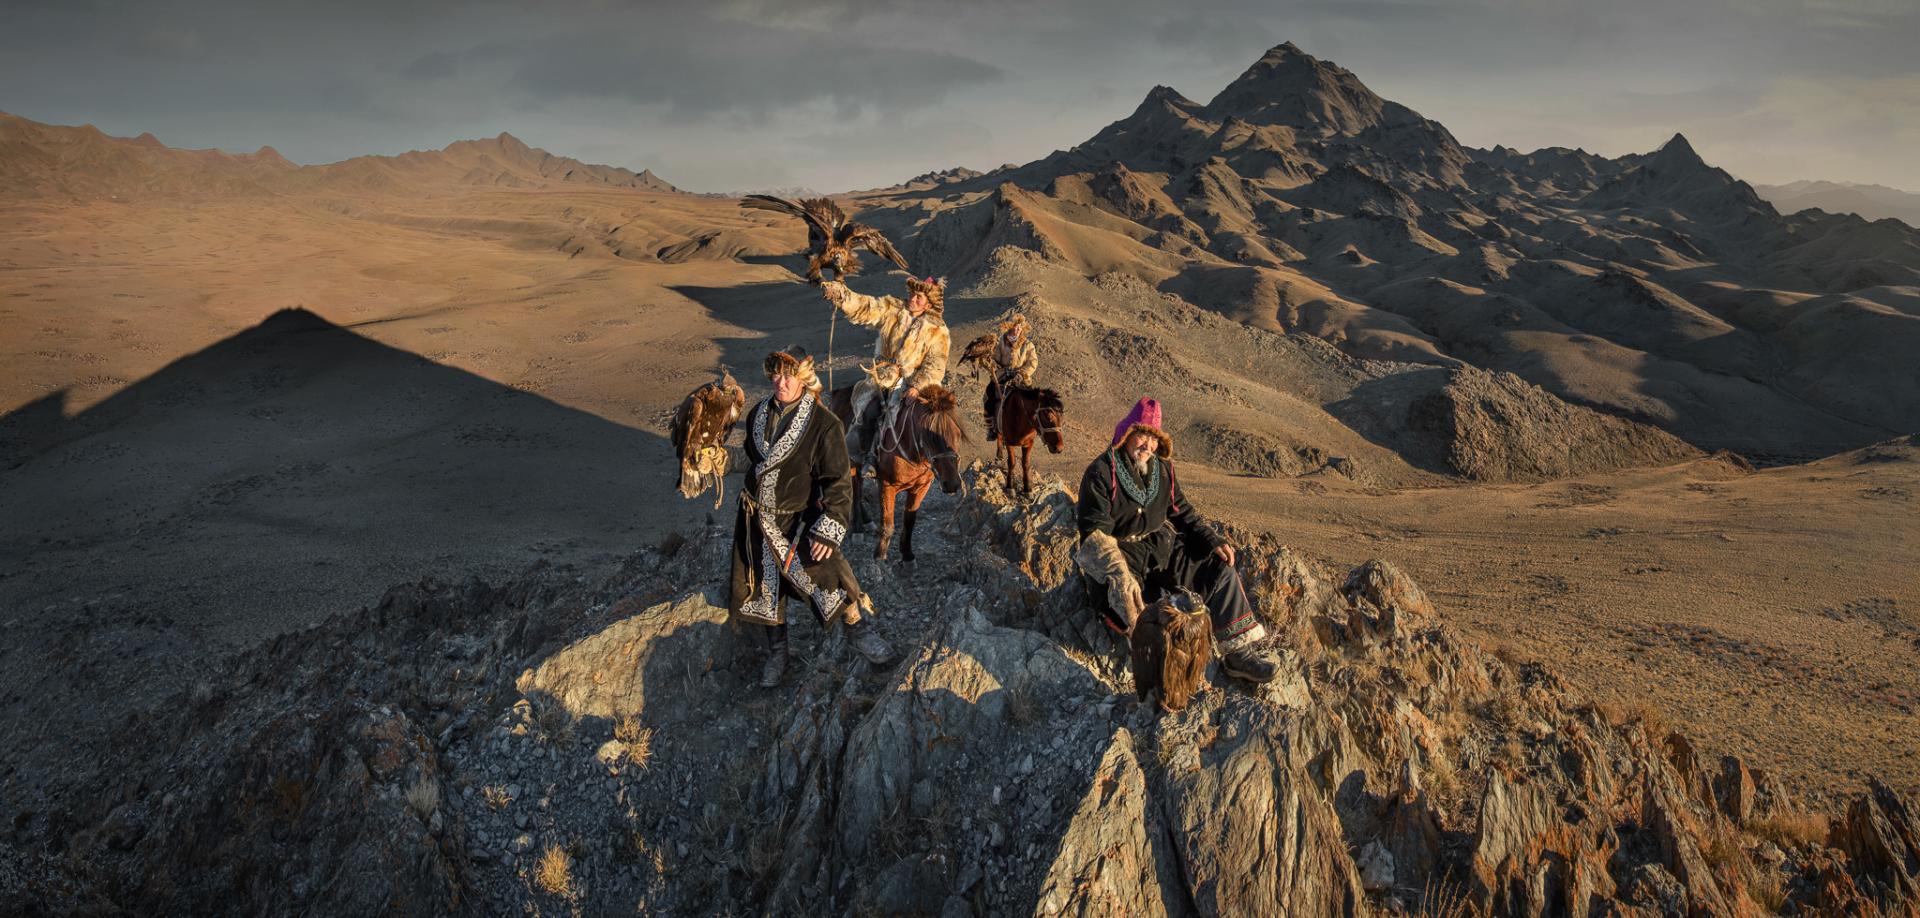 European Photography Awards Winner - Reign of the Eagle Hunters